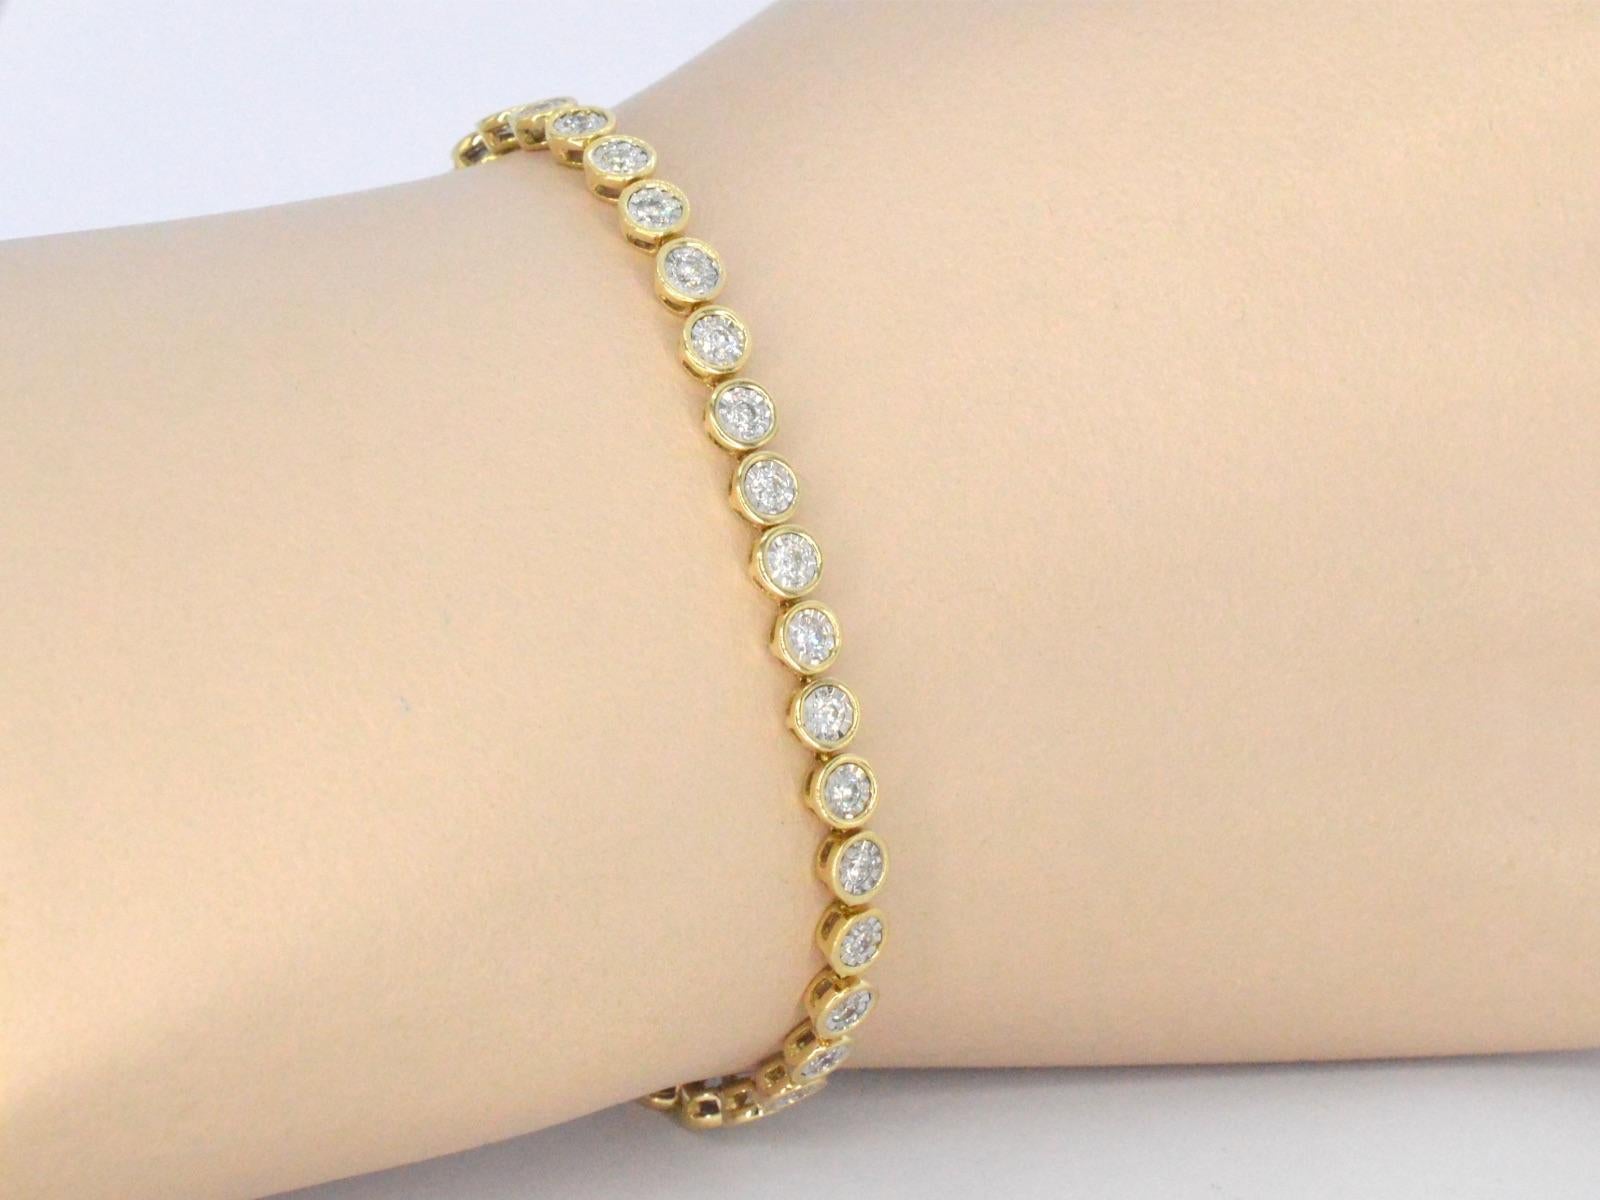 This 14K golden bracelet is an elegant piece of jewelry that exudes luxury and sophistication. It is adorned with brilliant cut diamonds that add a sparkling touch of glamour to its already stunning design. This bracelet is perfect for any special